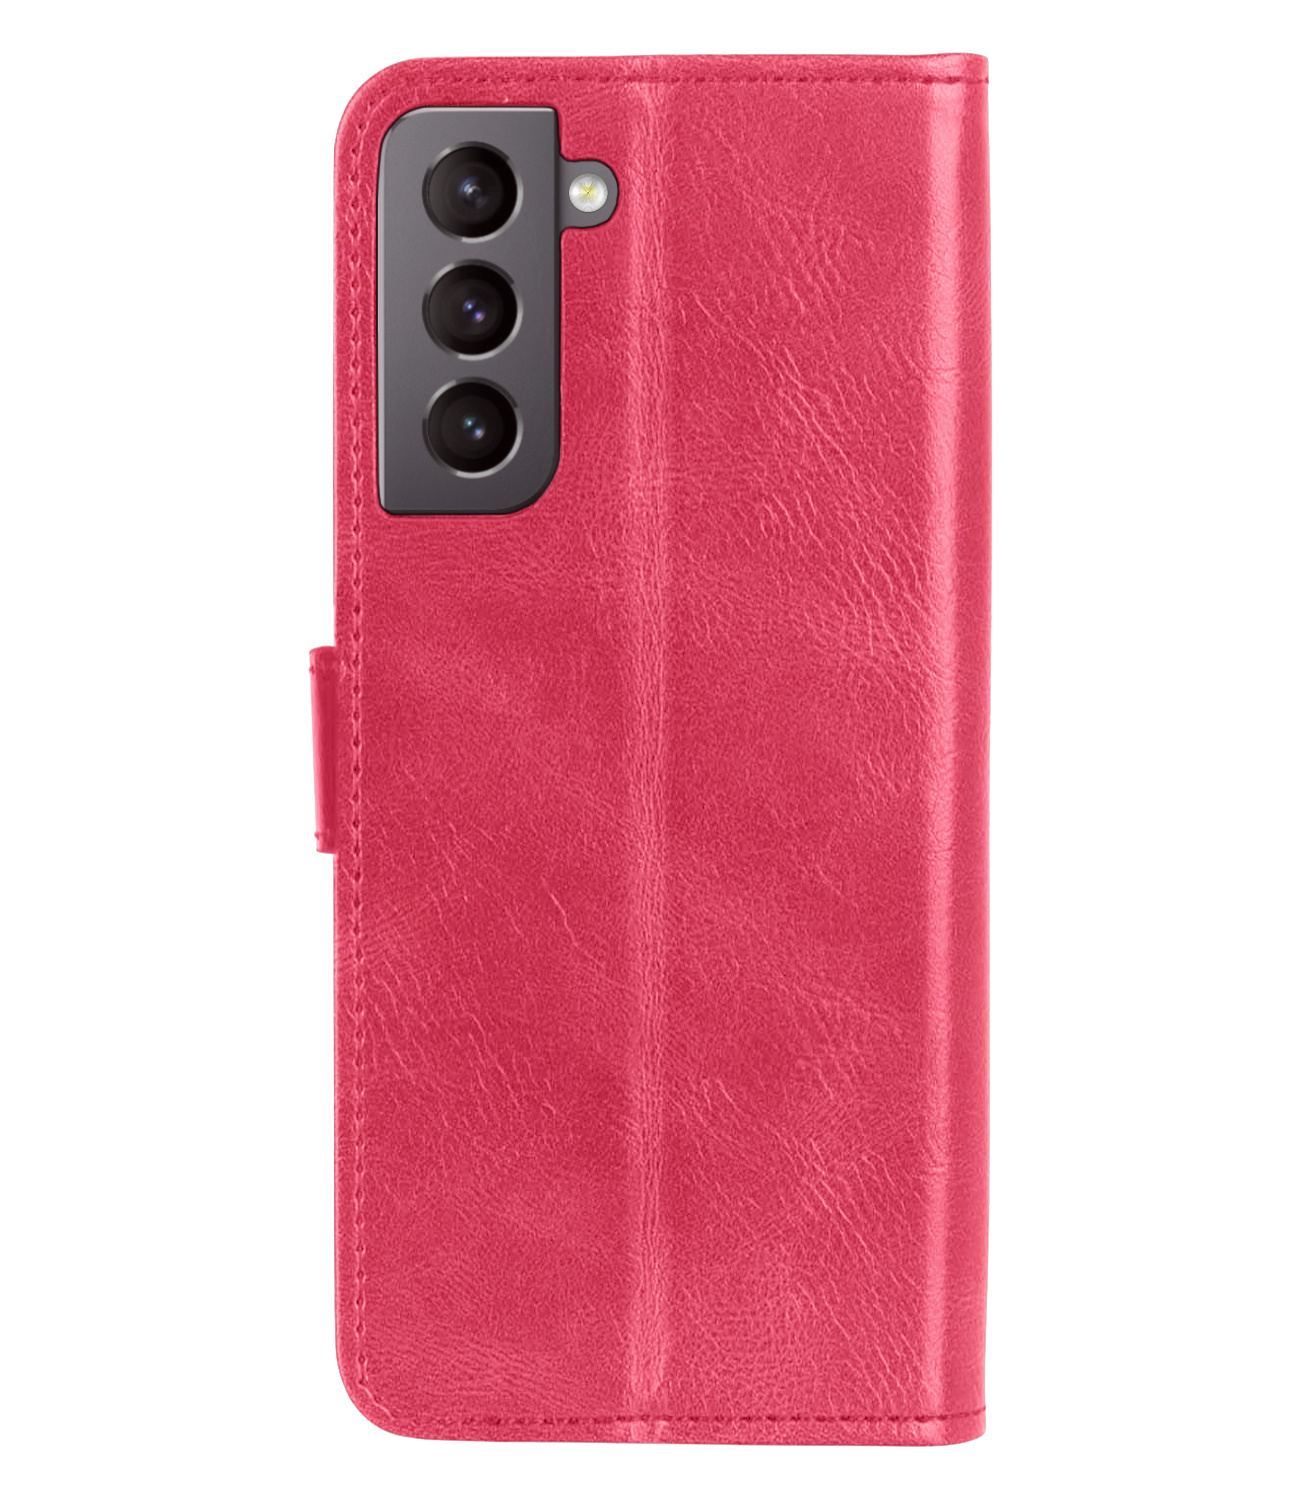 Nomfy Samsung Galaxy S21 FE Hoes Bookcase Donker Roze - Samsung Galaxy S21 FE Book Cover Flipcase - Samsung Galaxy S21 FE Hoesje Donkerroze